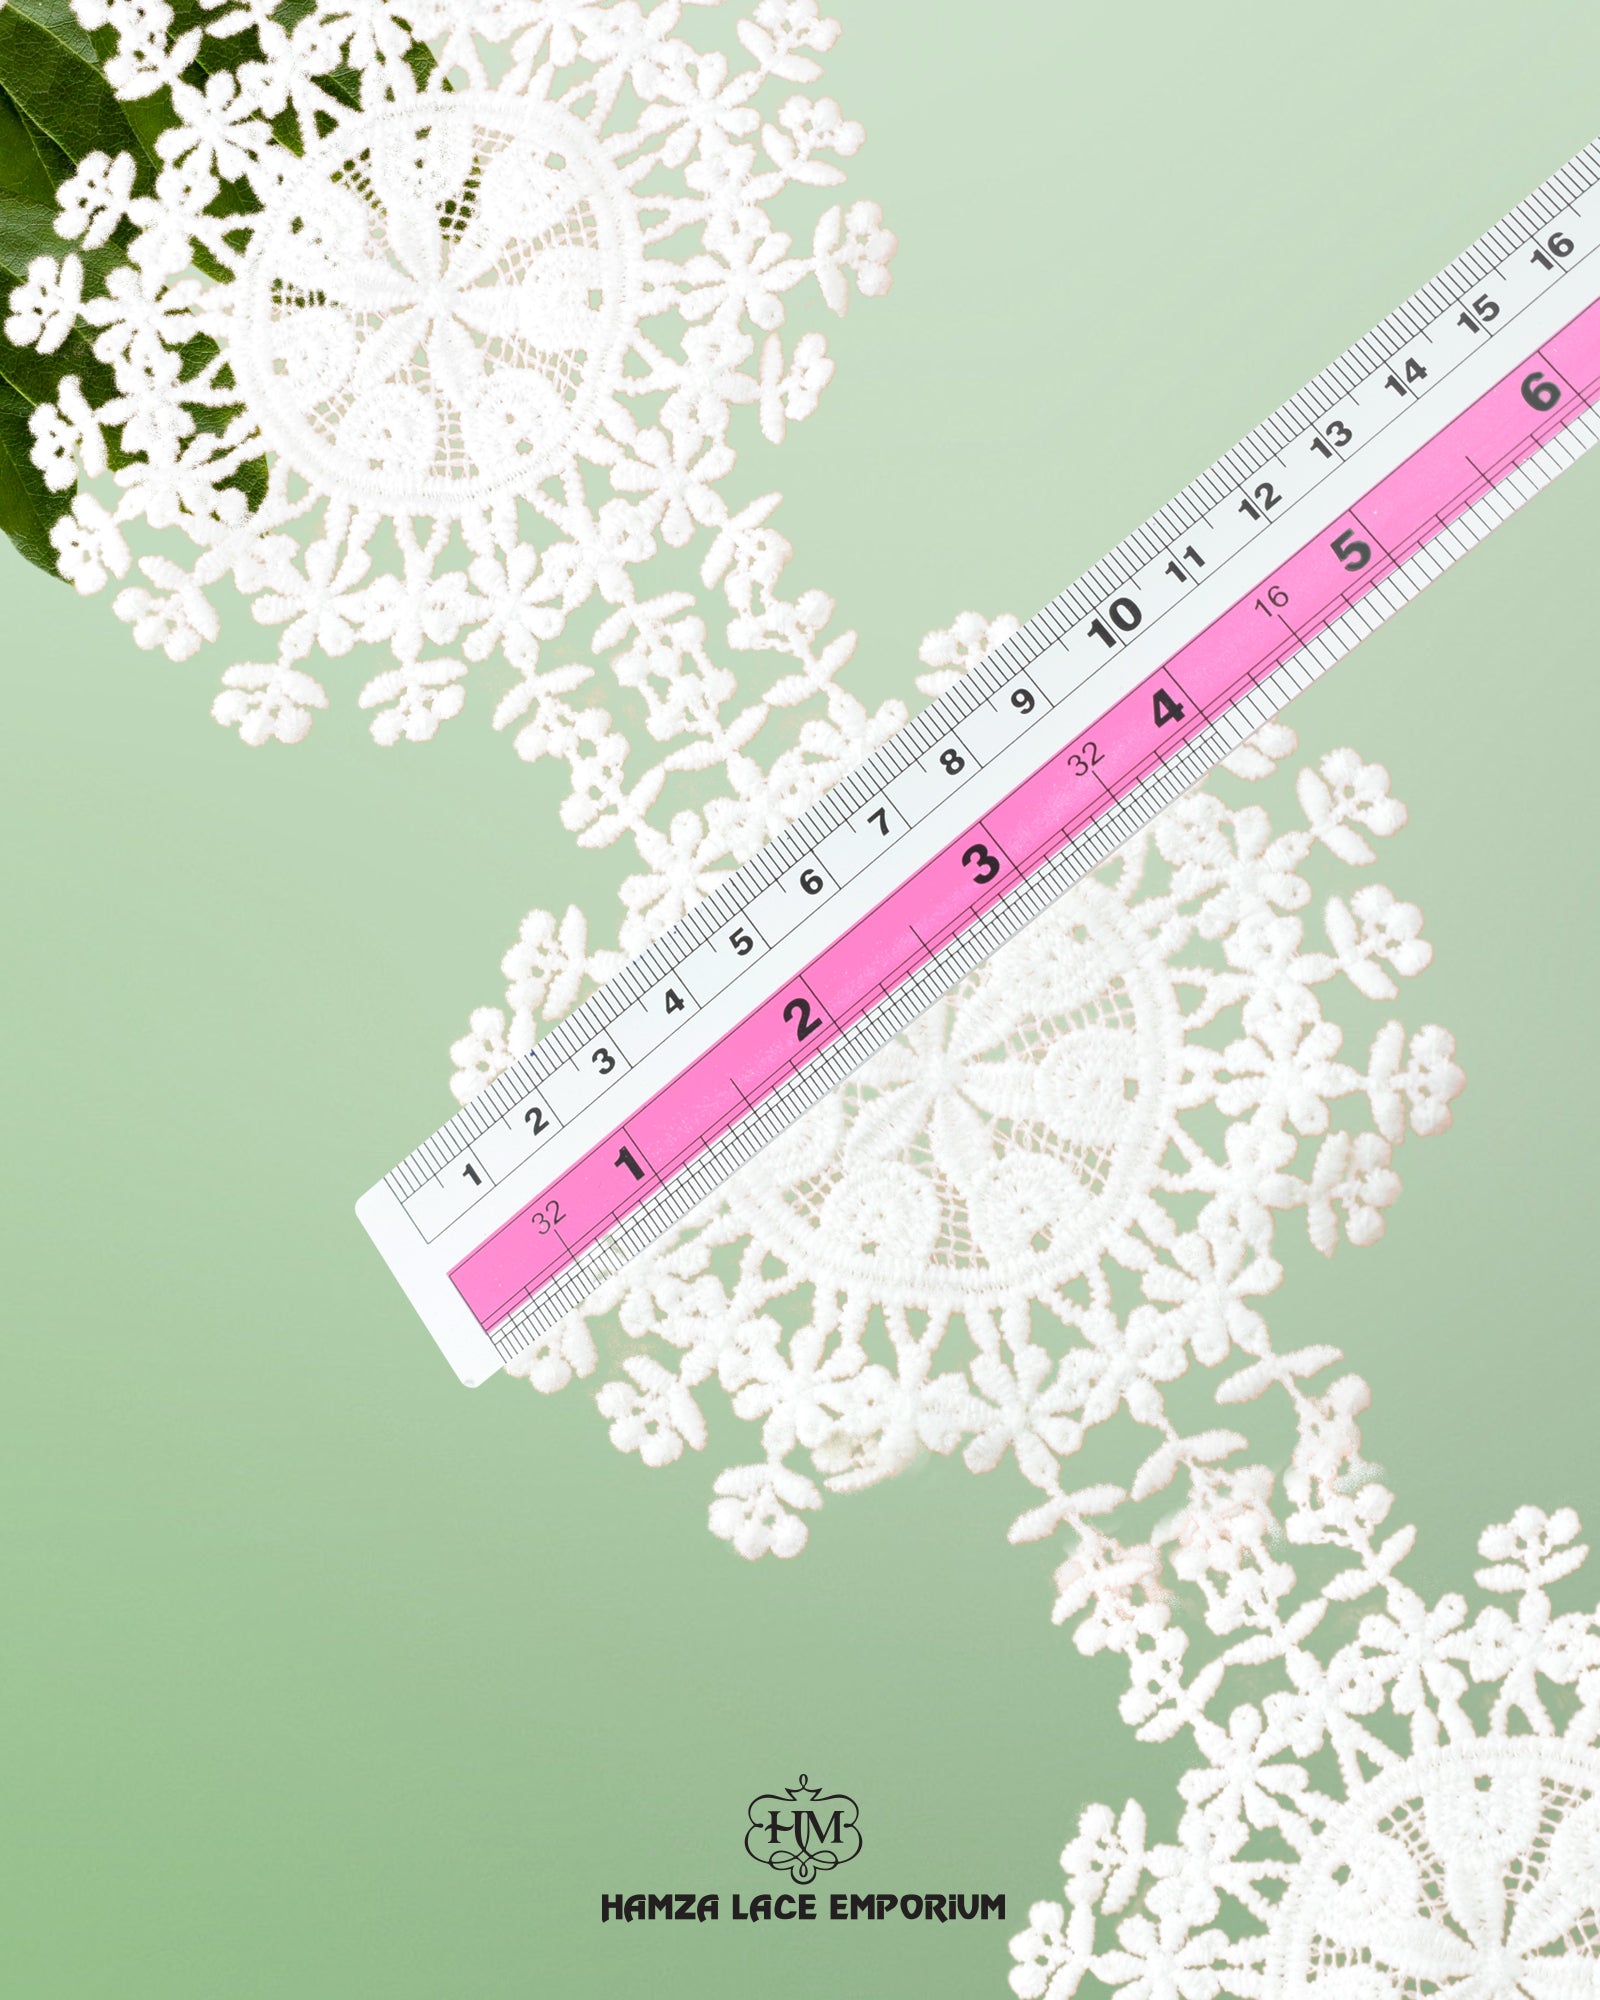 A ruler is on the 'Center Filling Lace 20831' measuring its size as  4.5 inches